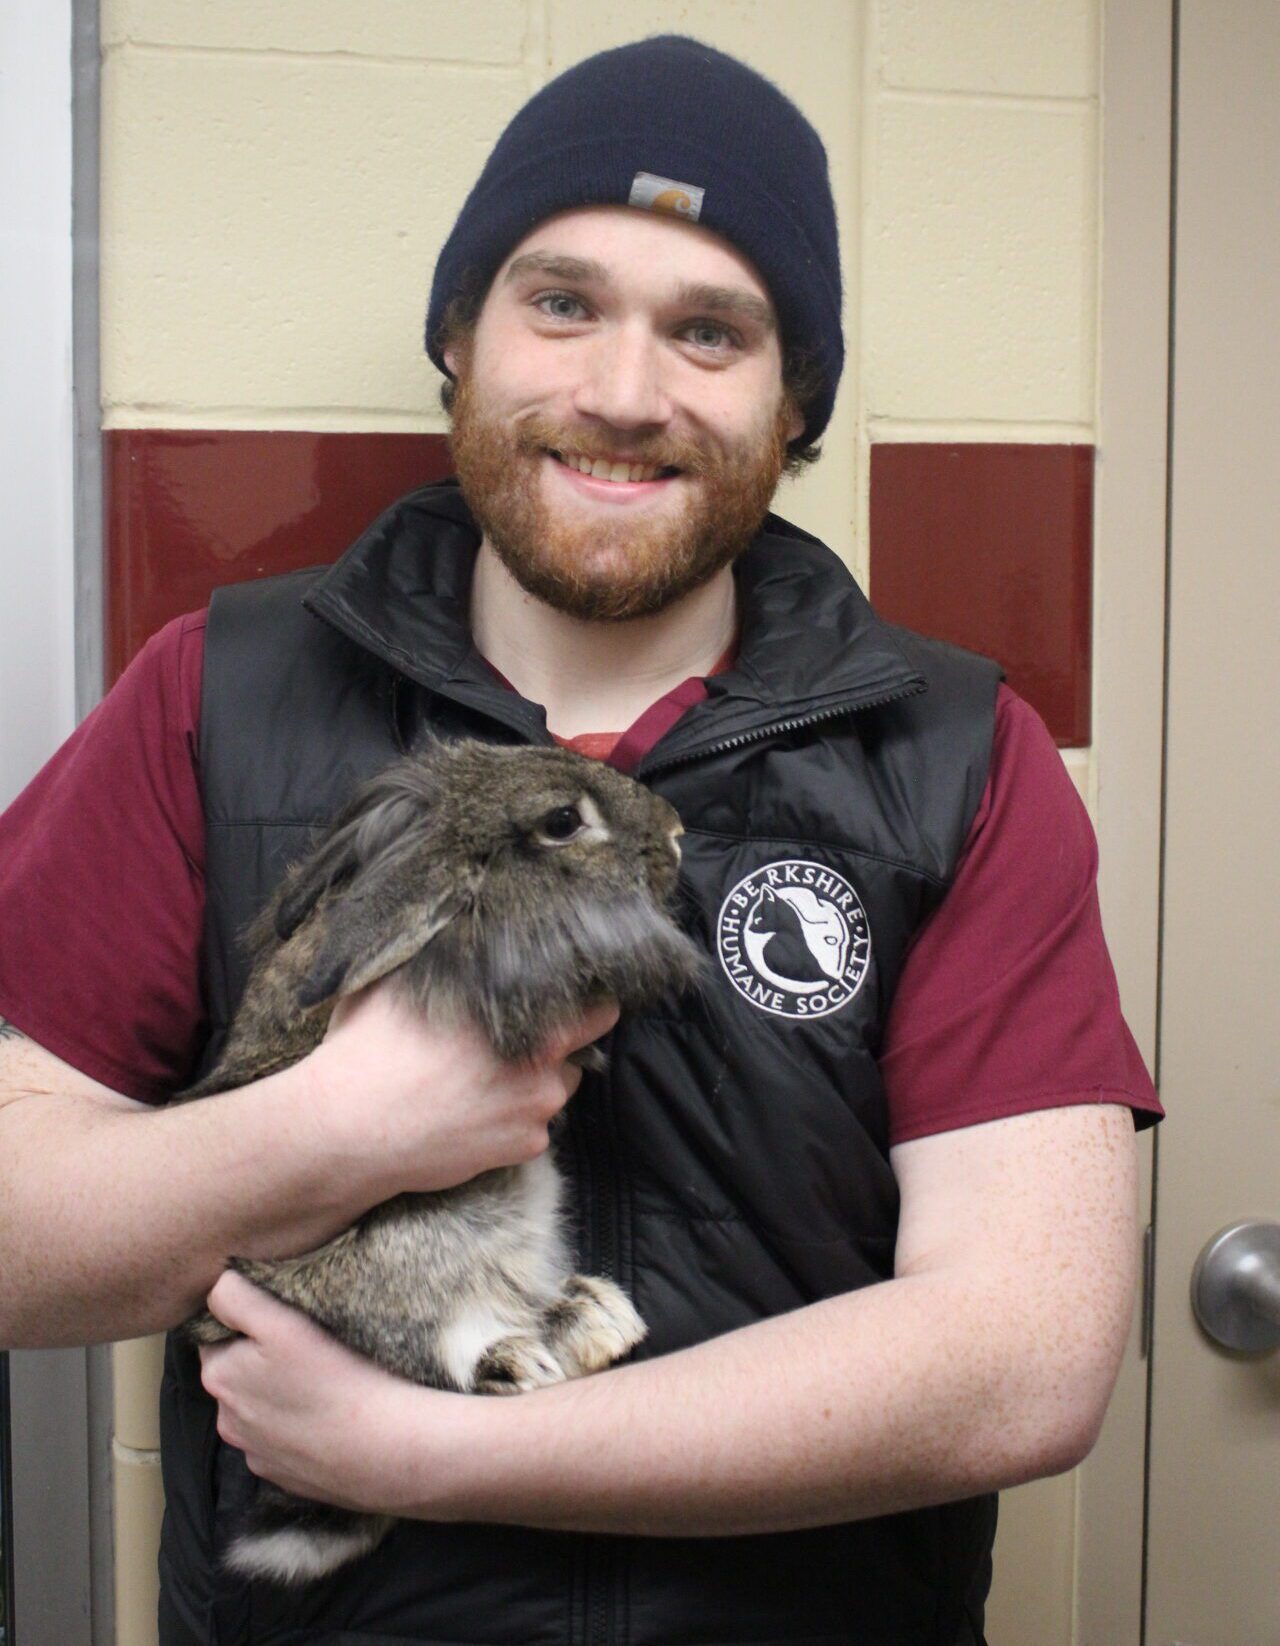 A man with a black knit cap and black Berkshire Humane Society vest holds a rabbit